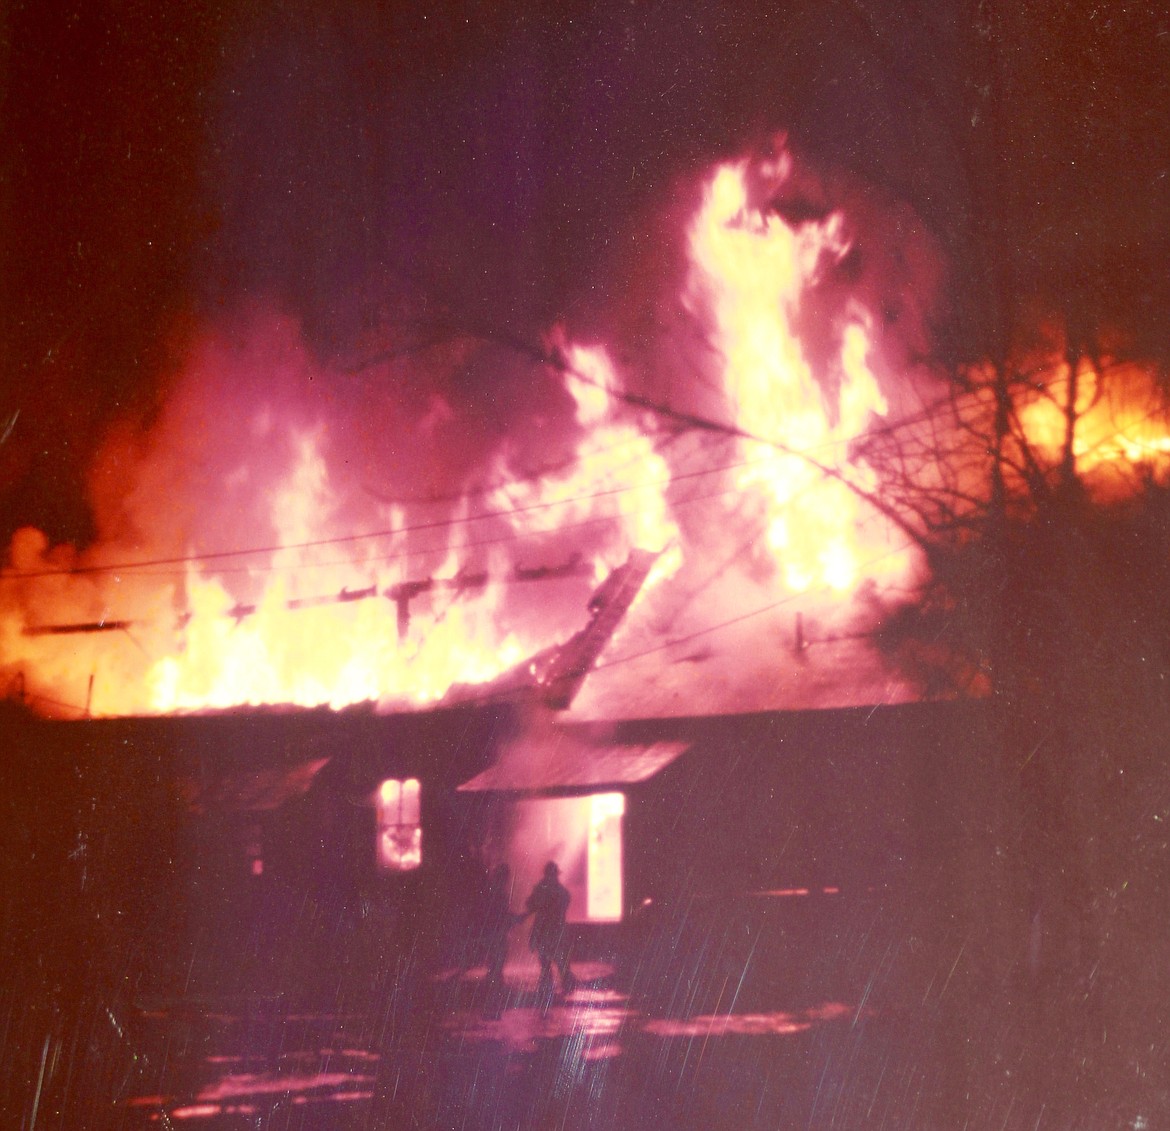 This color photo of the VFW fire from 1977 has been hanging in an office of the Plains VFW post 3596. The only note below the framed photo is Cockrell Photo.